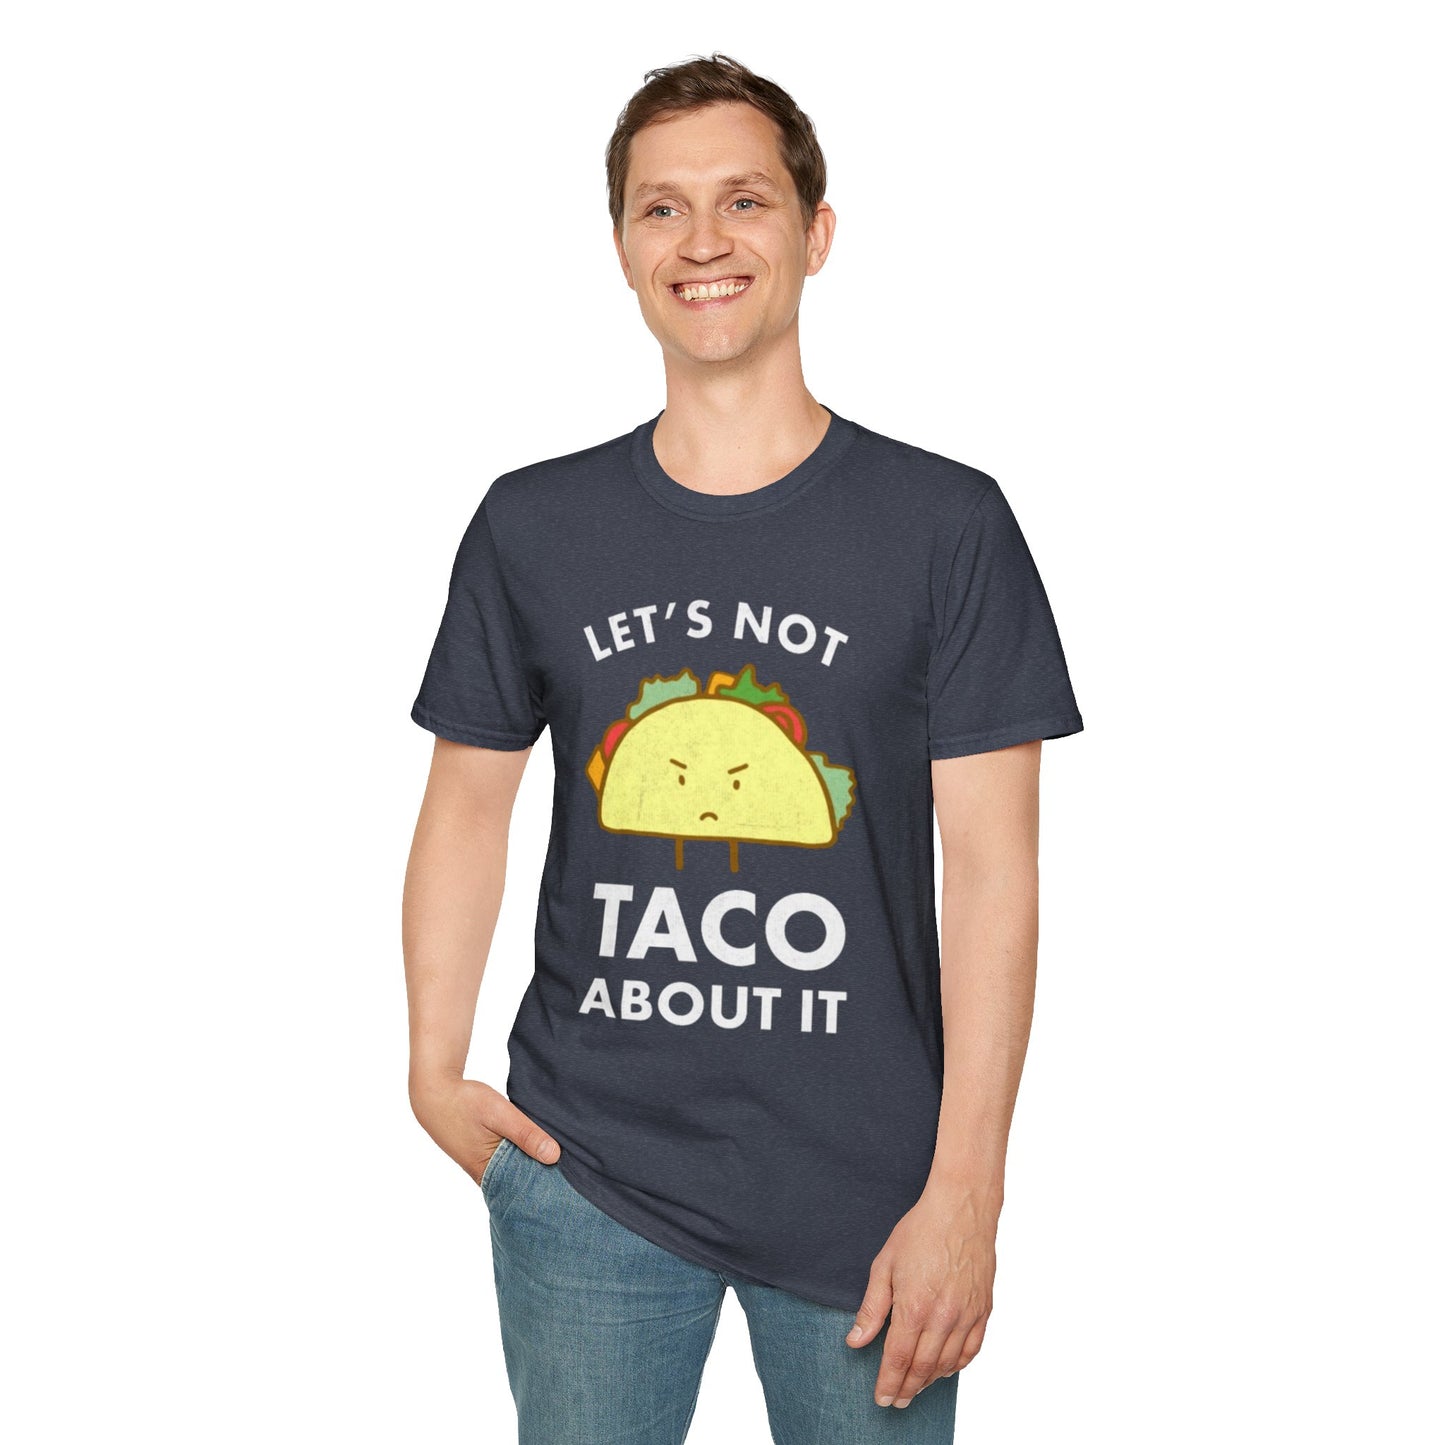 Lets not Taco about it - Unisex Softstyle T-Shirt